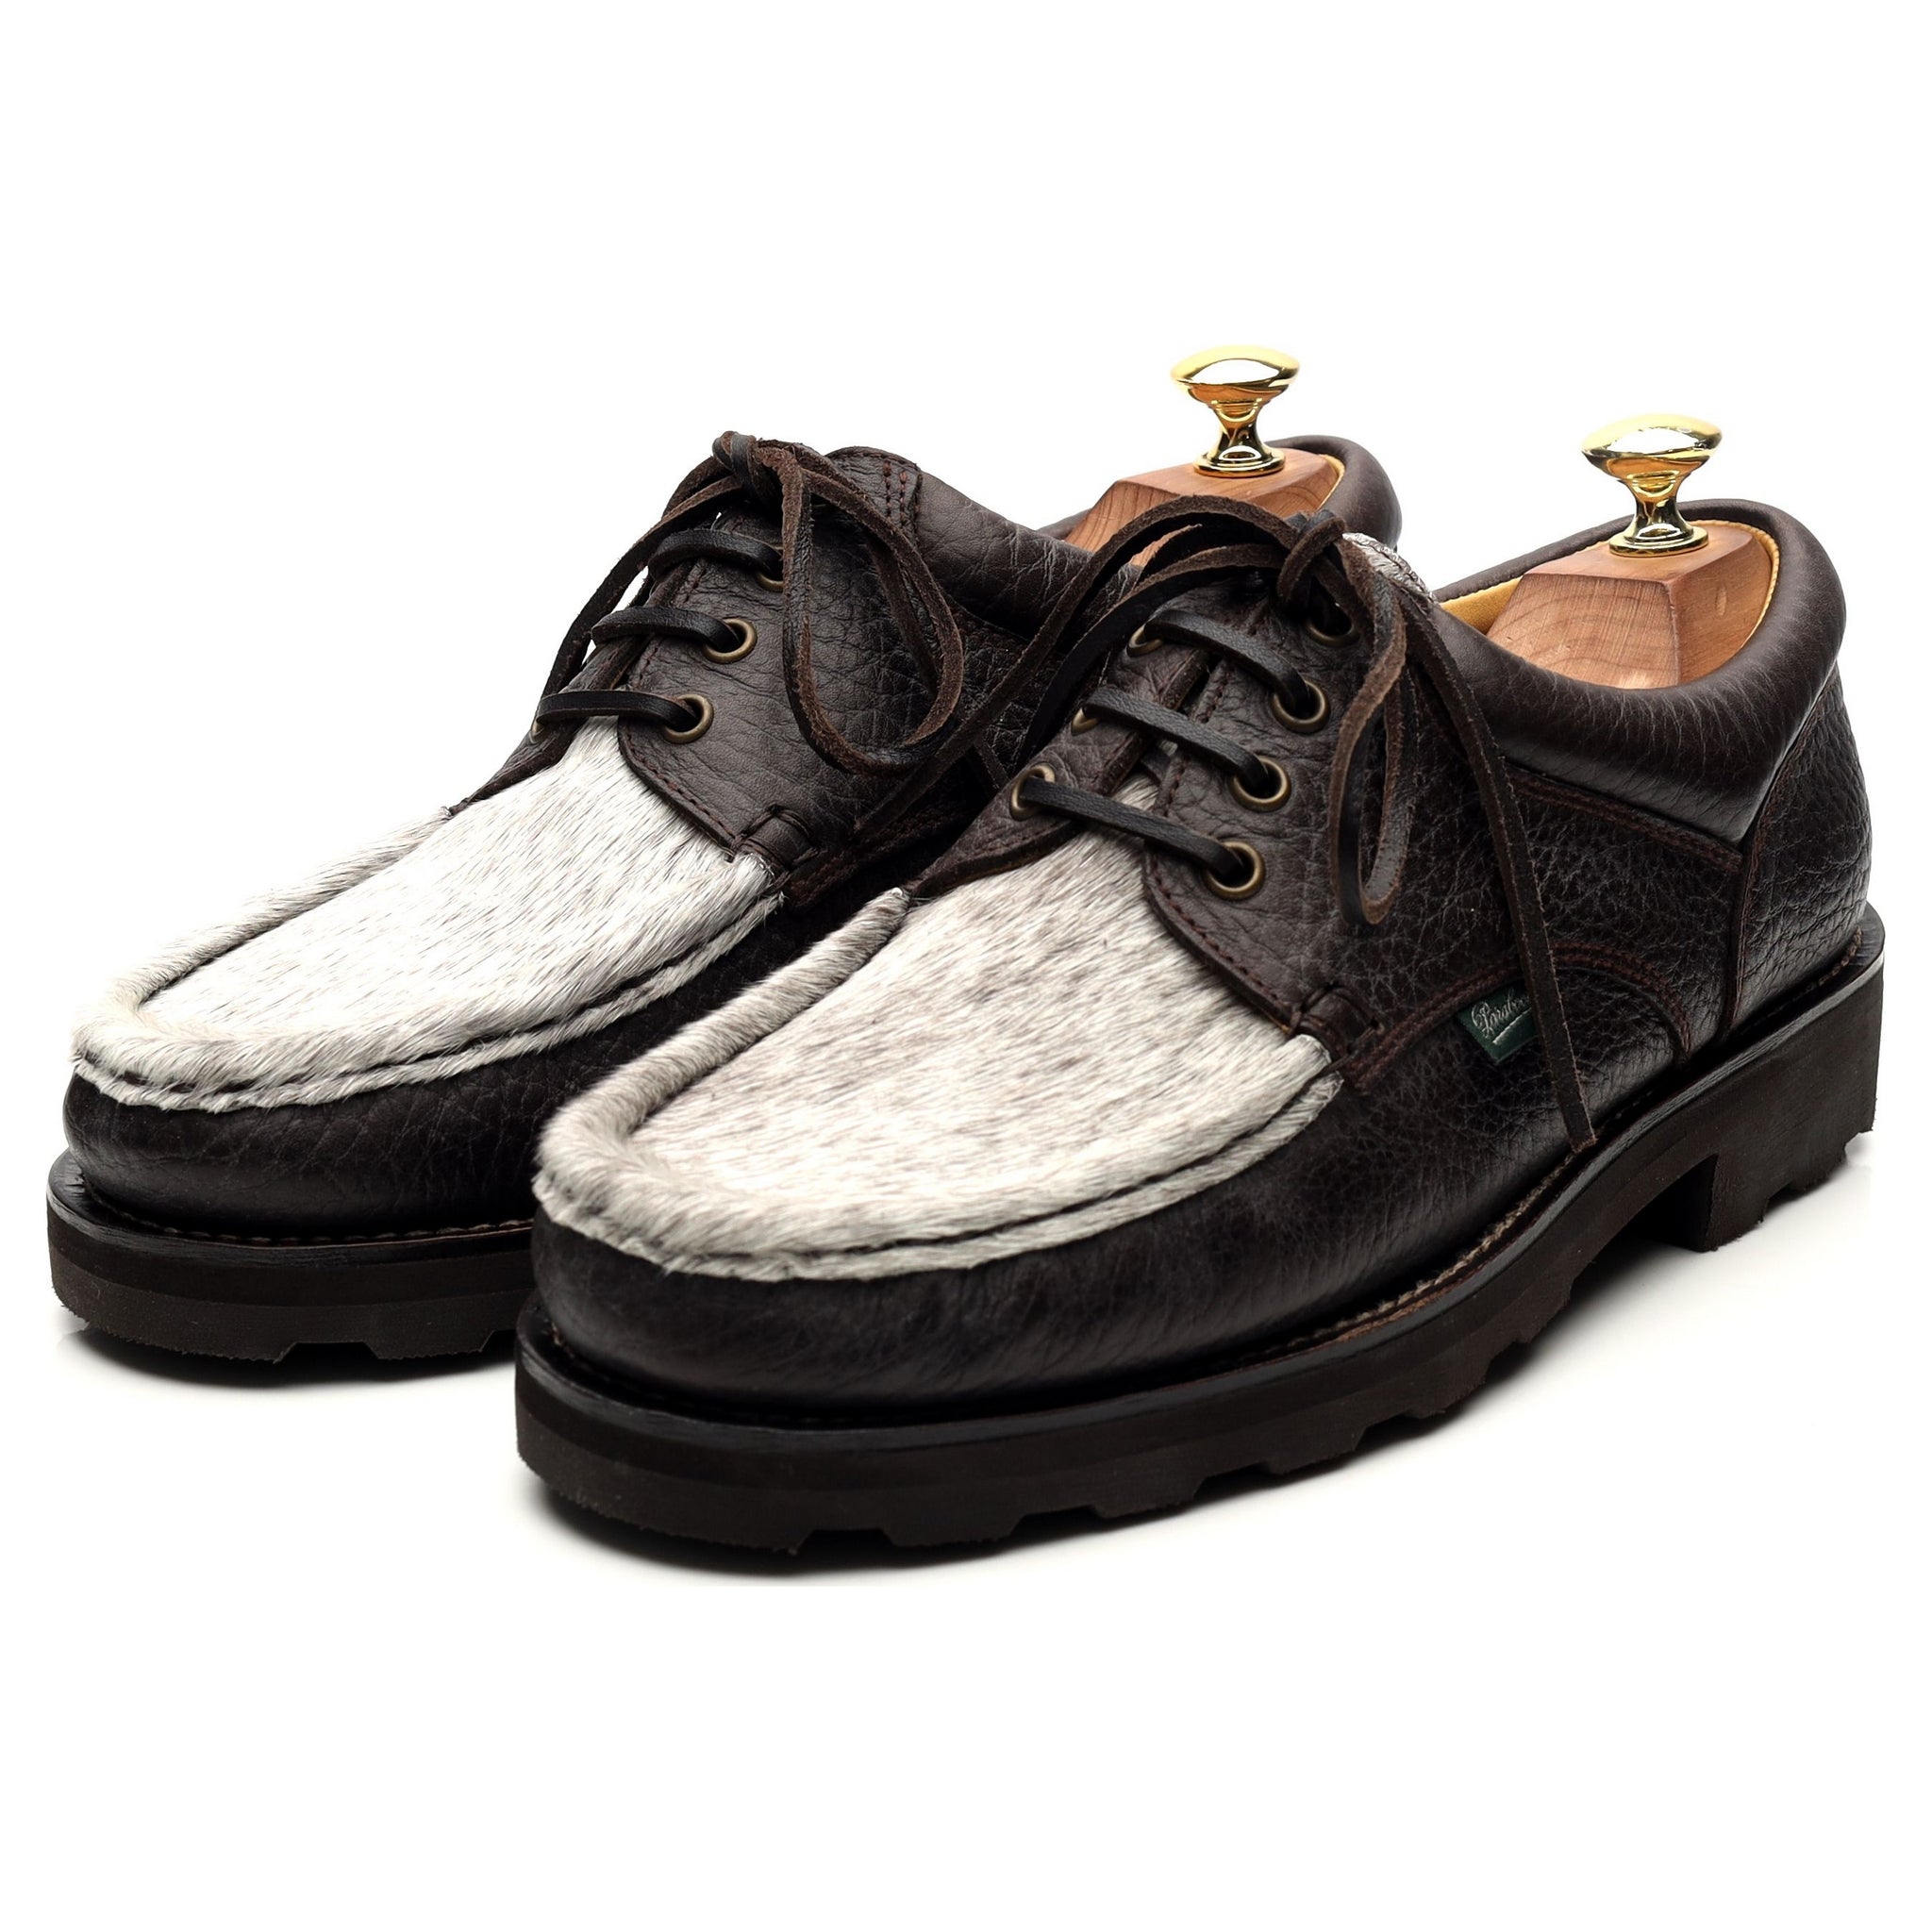 'Thiers' Dark Brown Leather Deck Shoes UK 8 - Abbot's Shoes